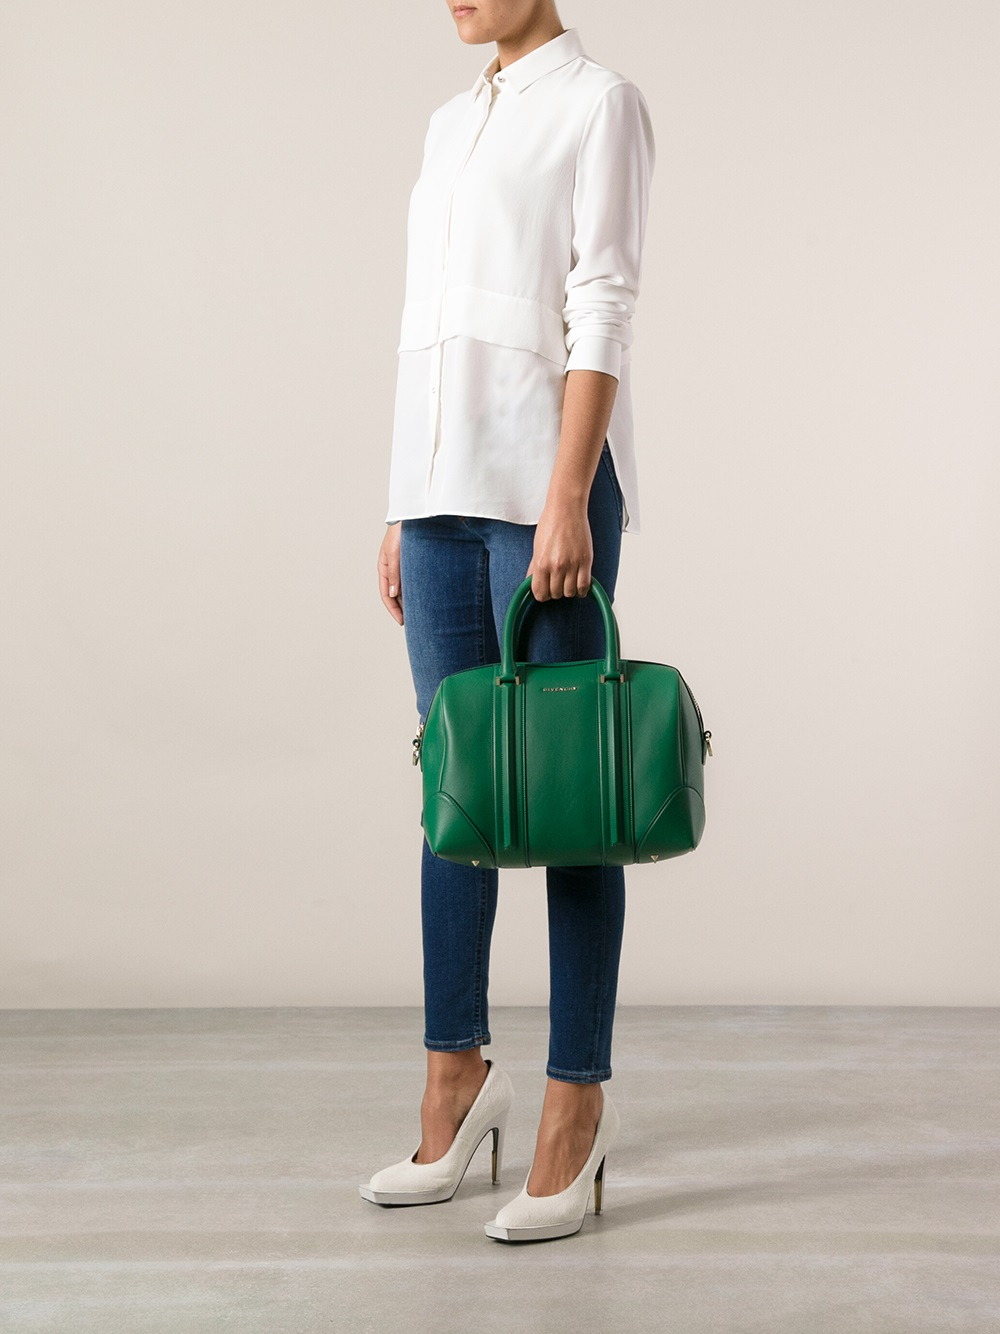 Givenchy Lucrezia Medium Tote in Green - Lyst